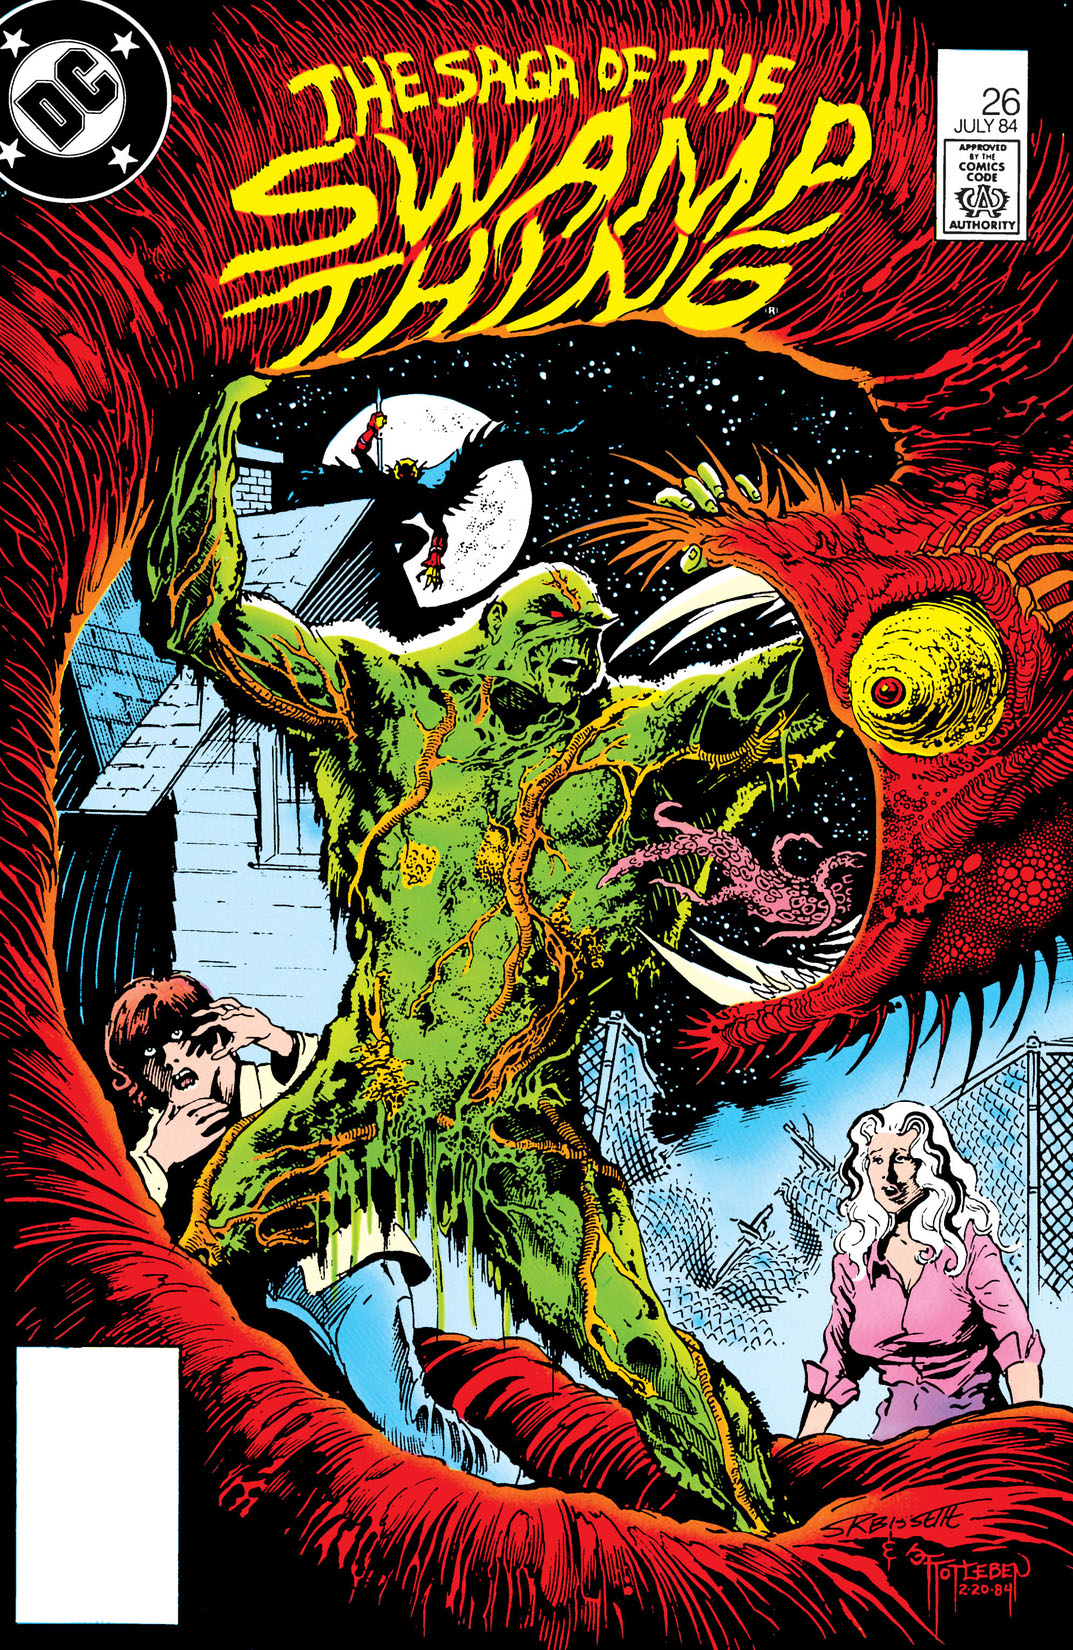 The Saga of the Swamp Thing (1982-) #26 preview images